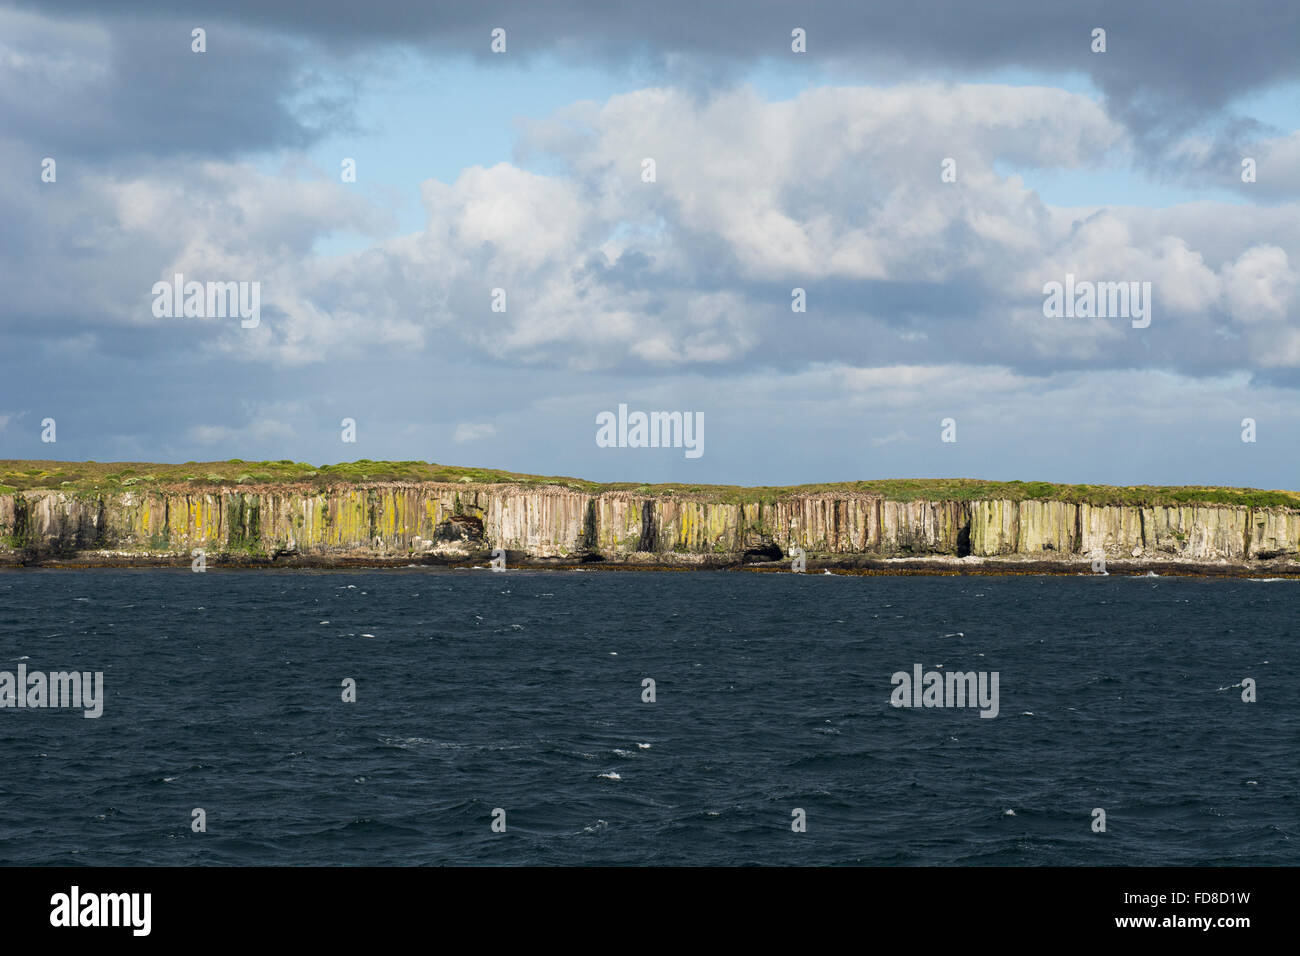 New Zealand, Auckland Islands, uninhabited archipelago in the south Pacific Ocean. Southern Ocean view of the cliffs at Enderby. Stock Photo